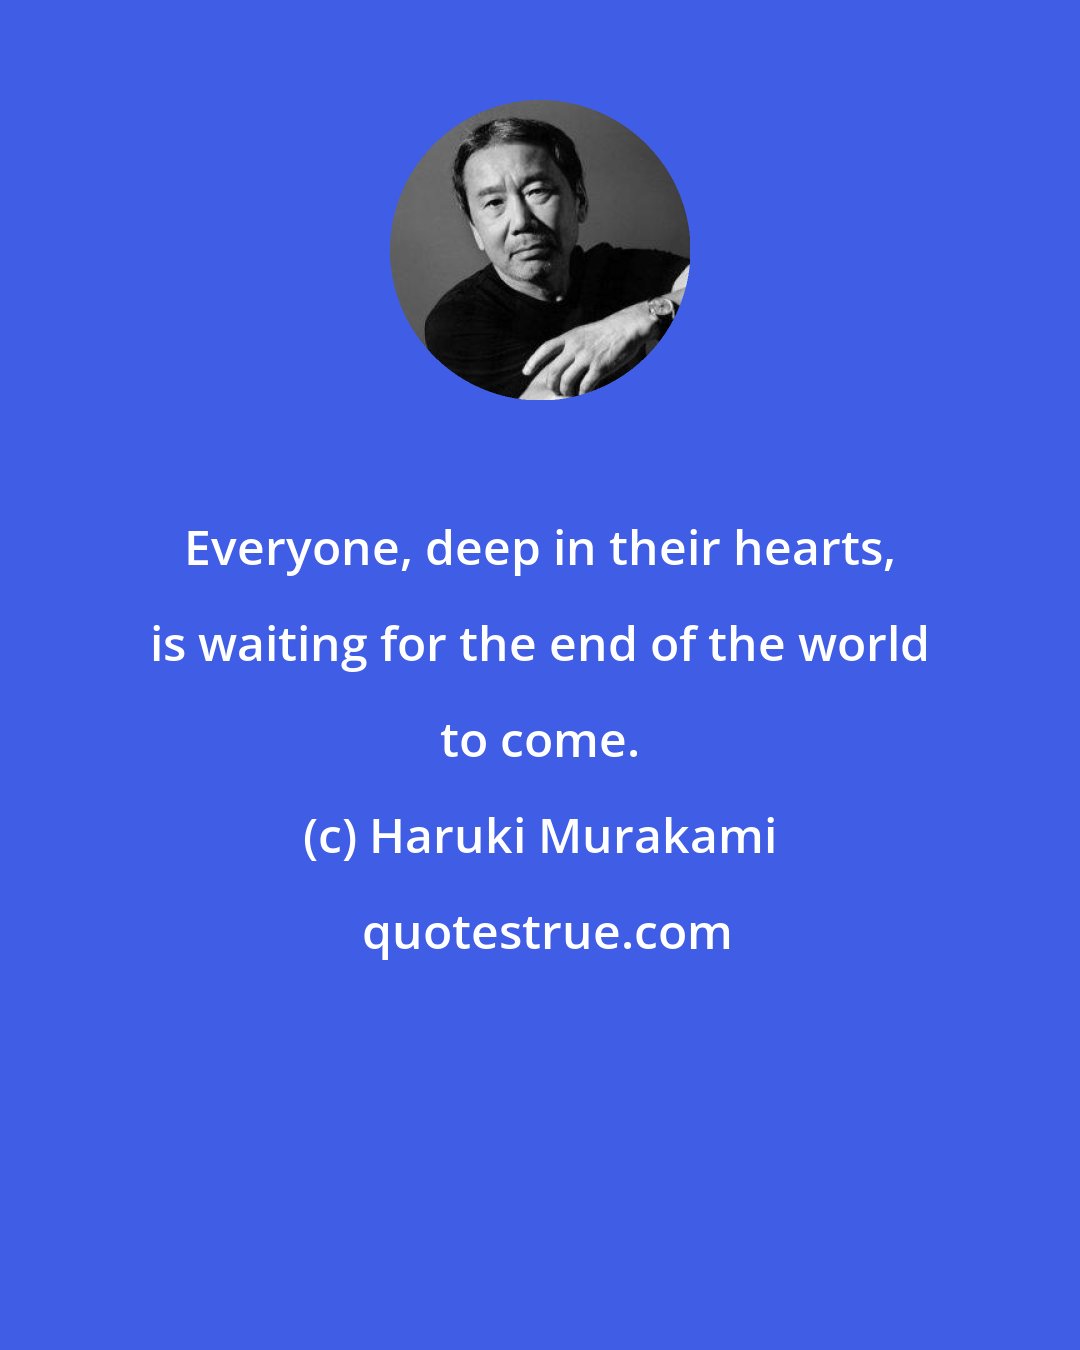 Haruki Murakami: Everyone, deep in their hearts, is waiting for the end of the world to come.